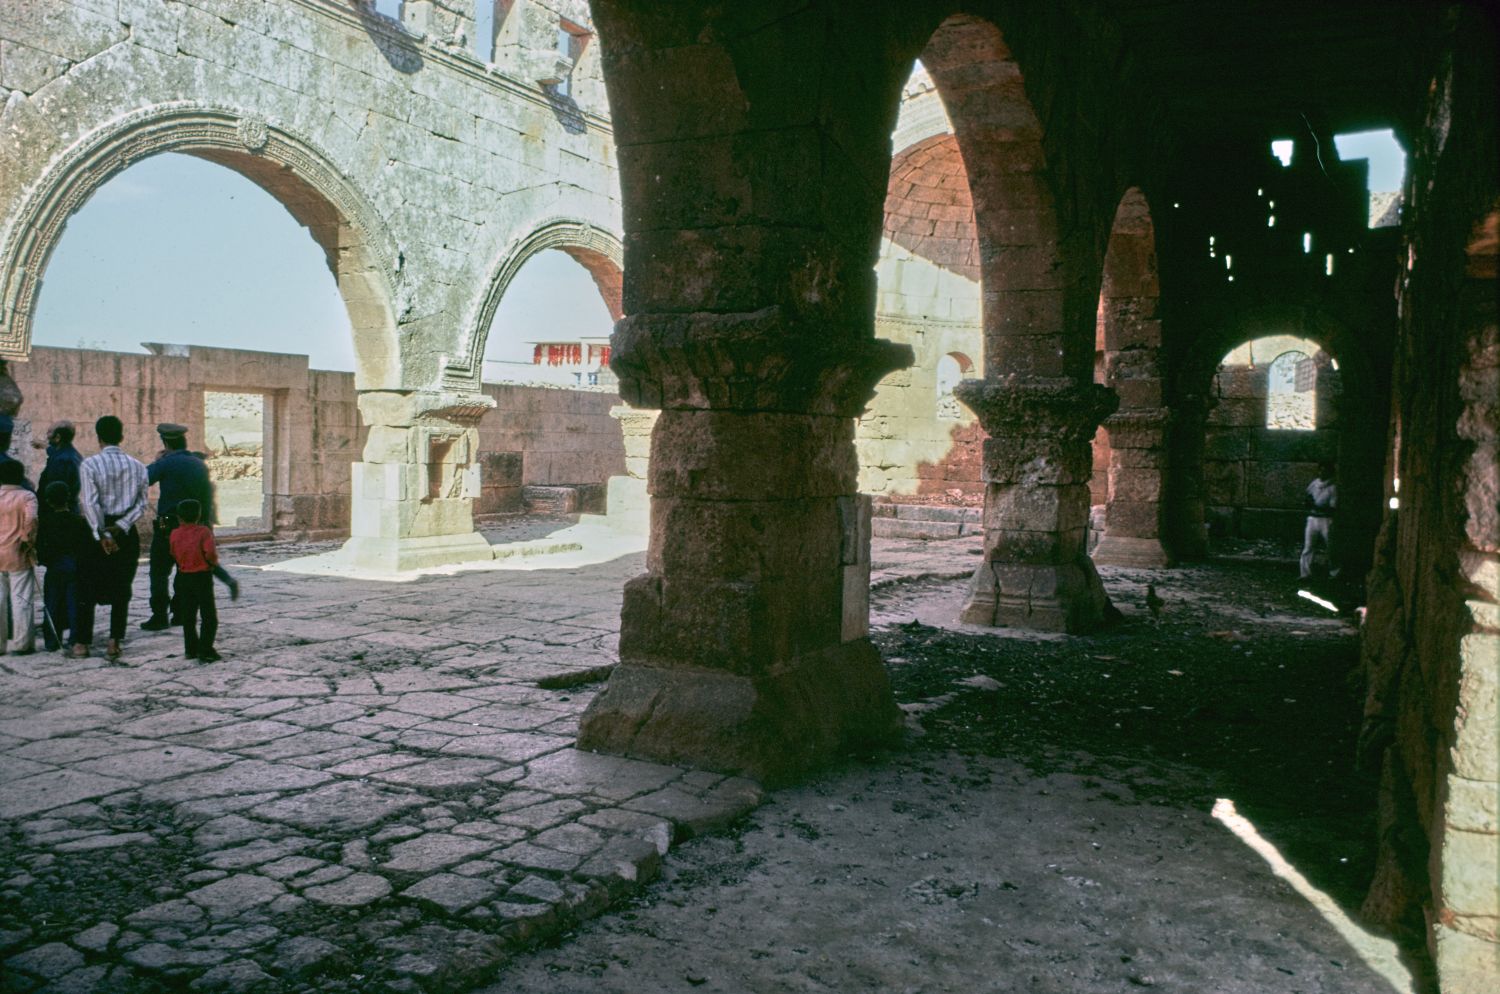 Interior view from south side aisle facing northeast toward nave.